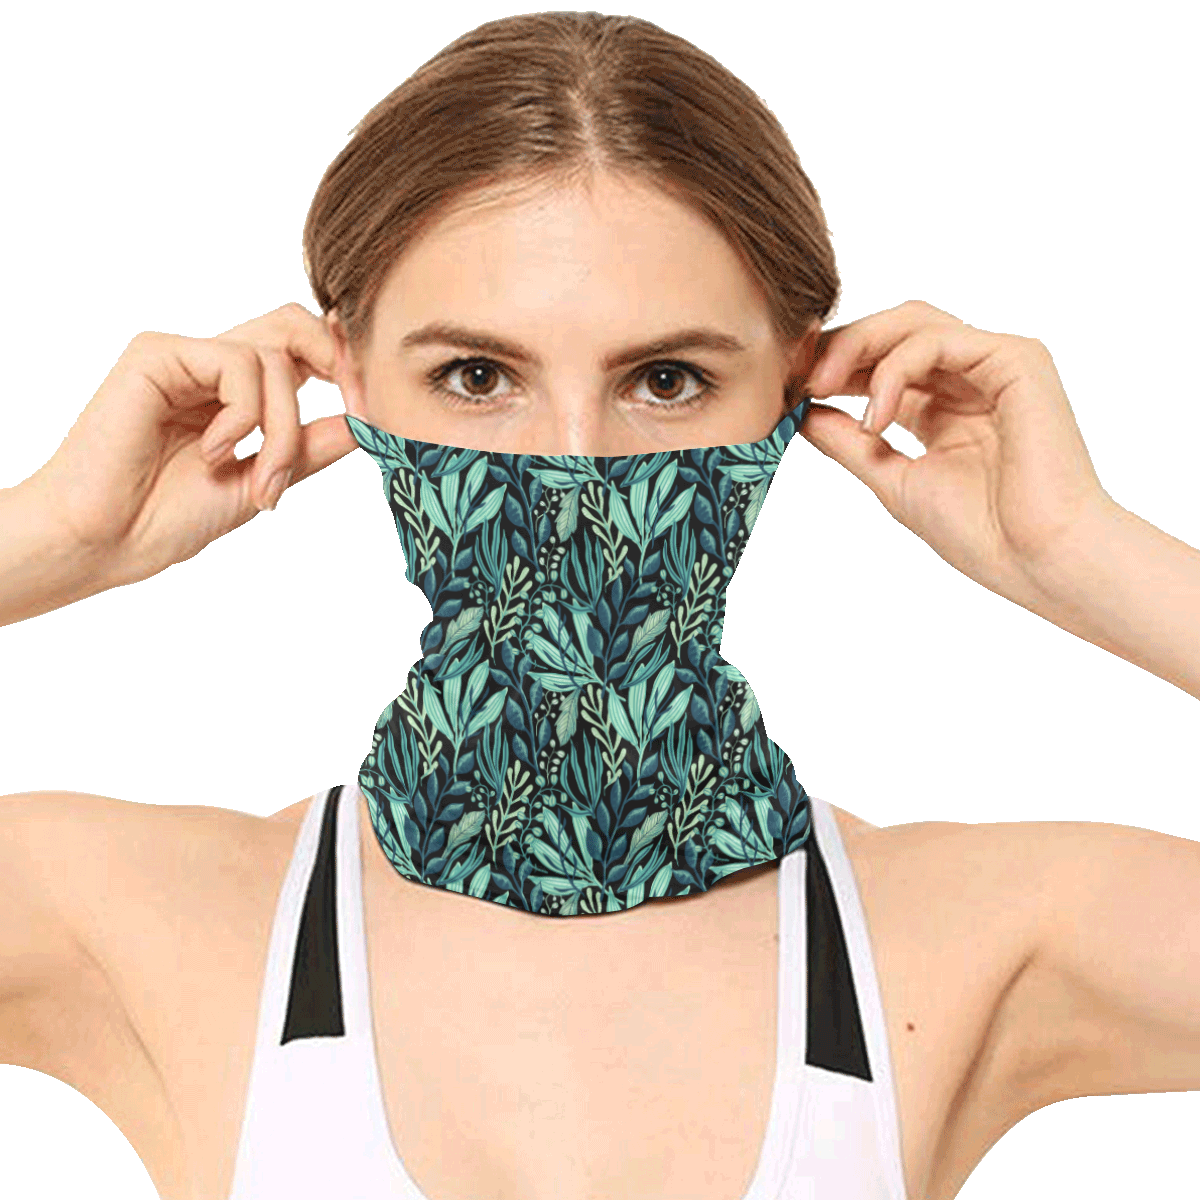 Leafy Green Bandana 3 Pack Face Mask Cover Multifunctional Headwear (Pack of 3)